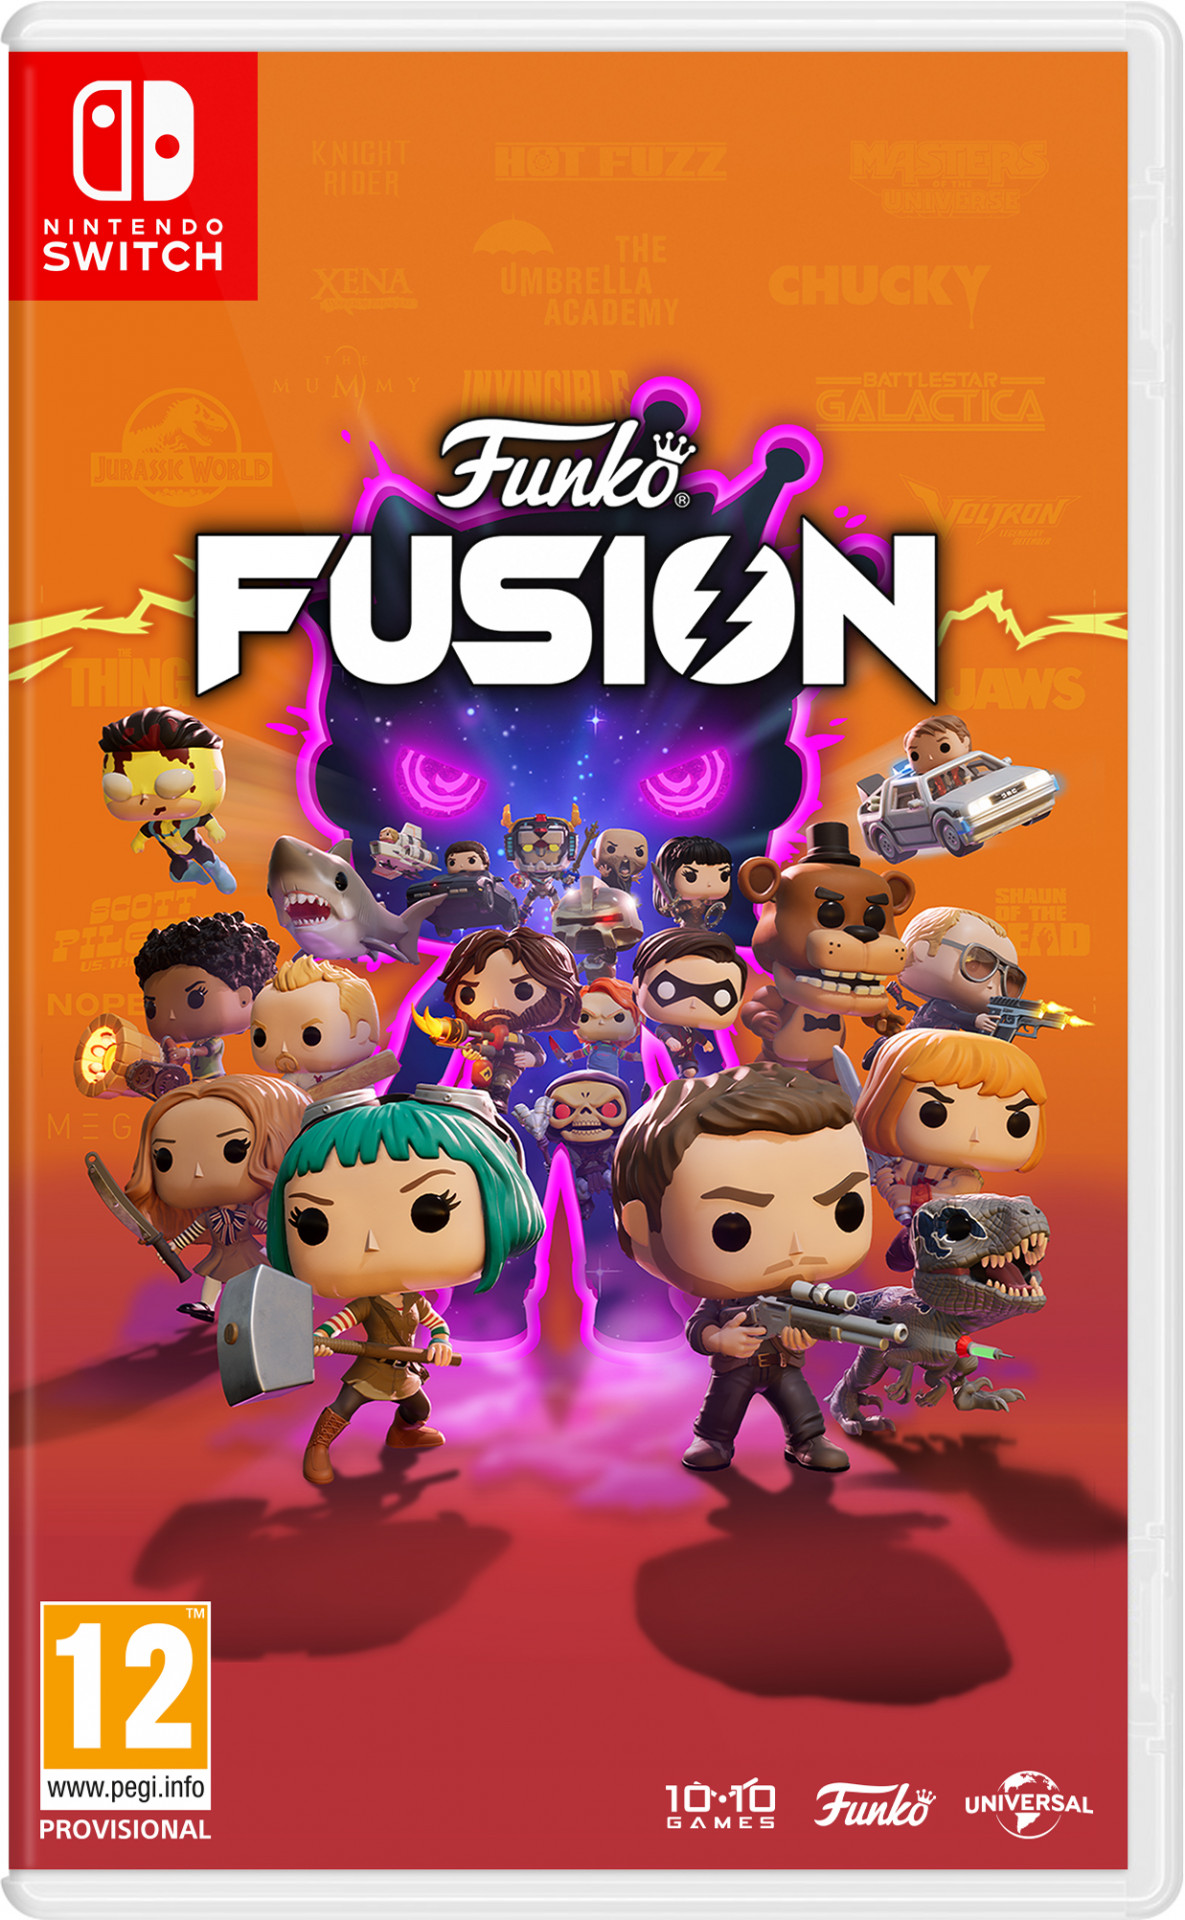 Funko Fusion (Switch), 10:10 Games Limited